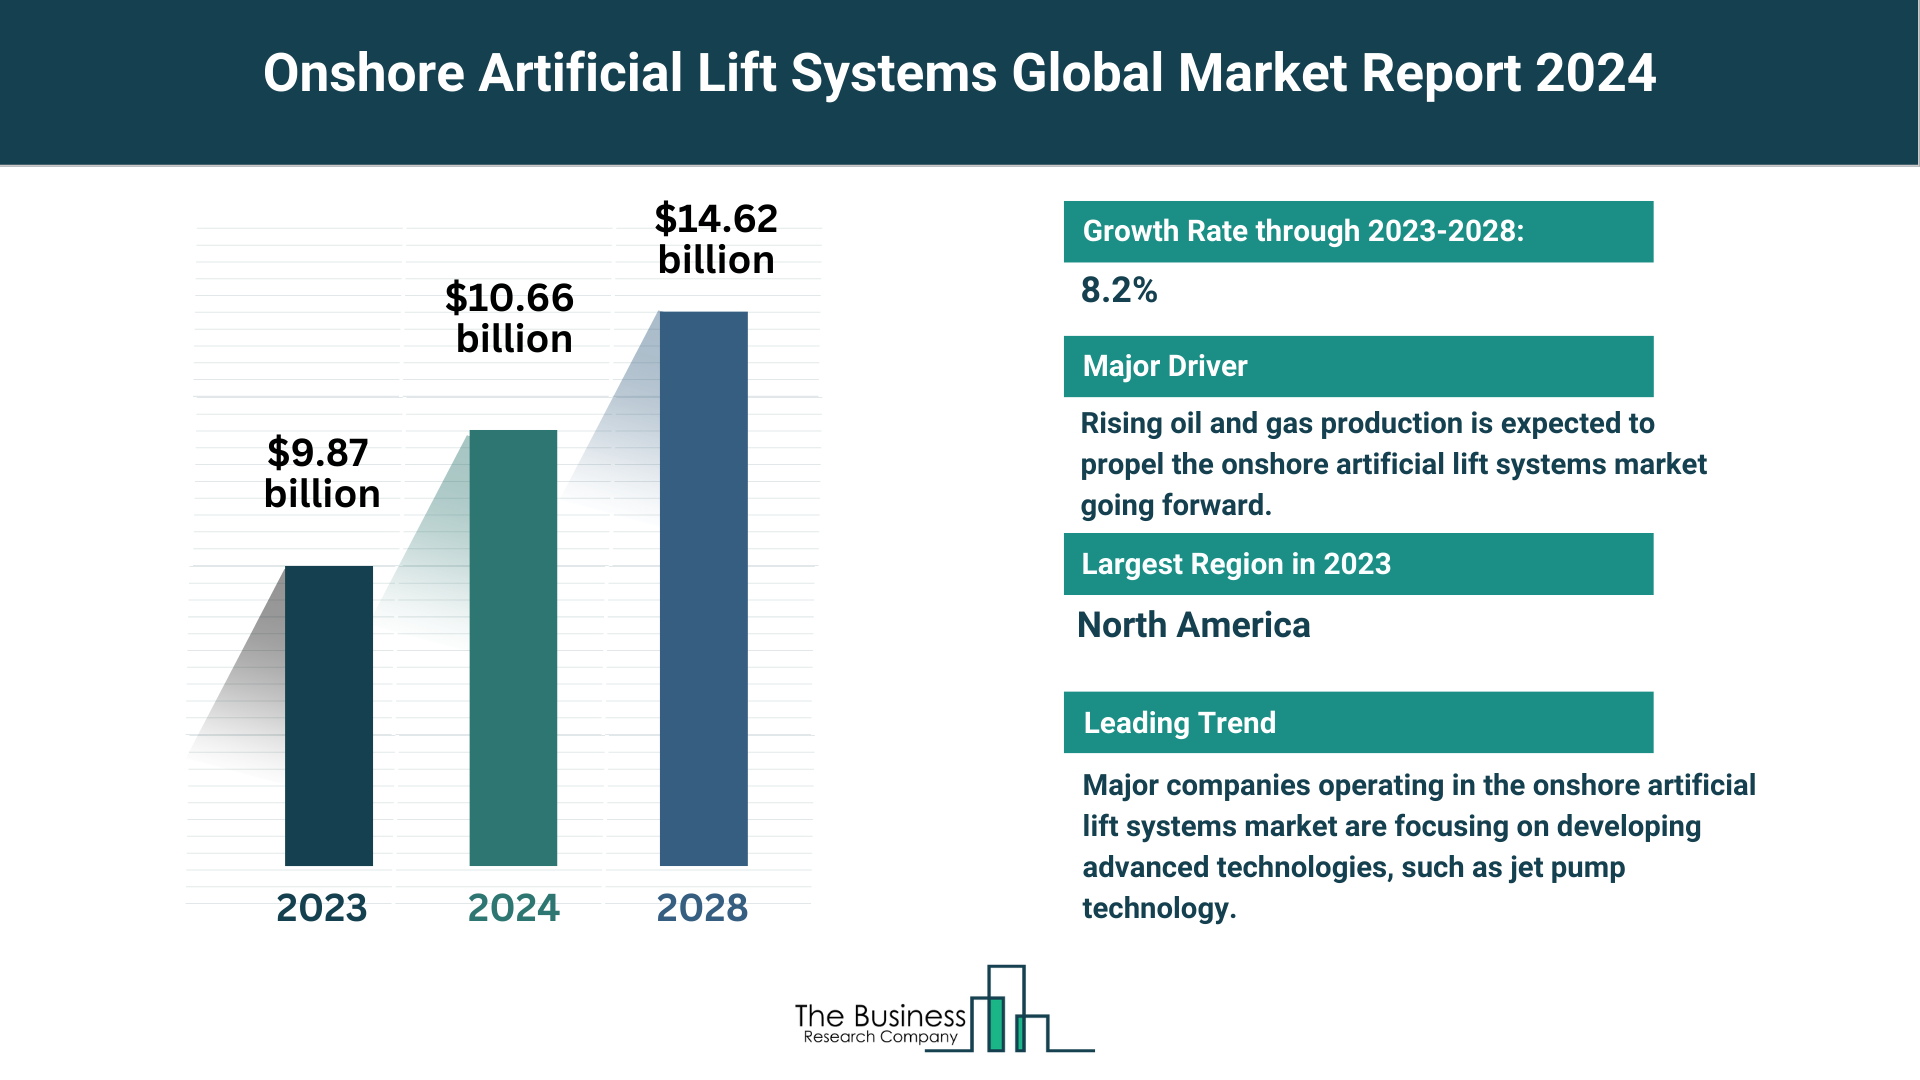 5 Key Takeaways From The Onshore Artificial Lift Systems Market Report 2024